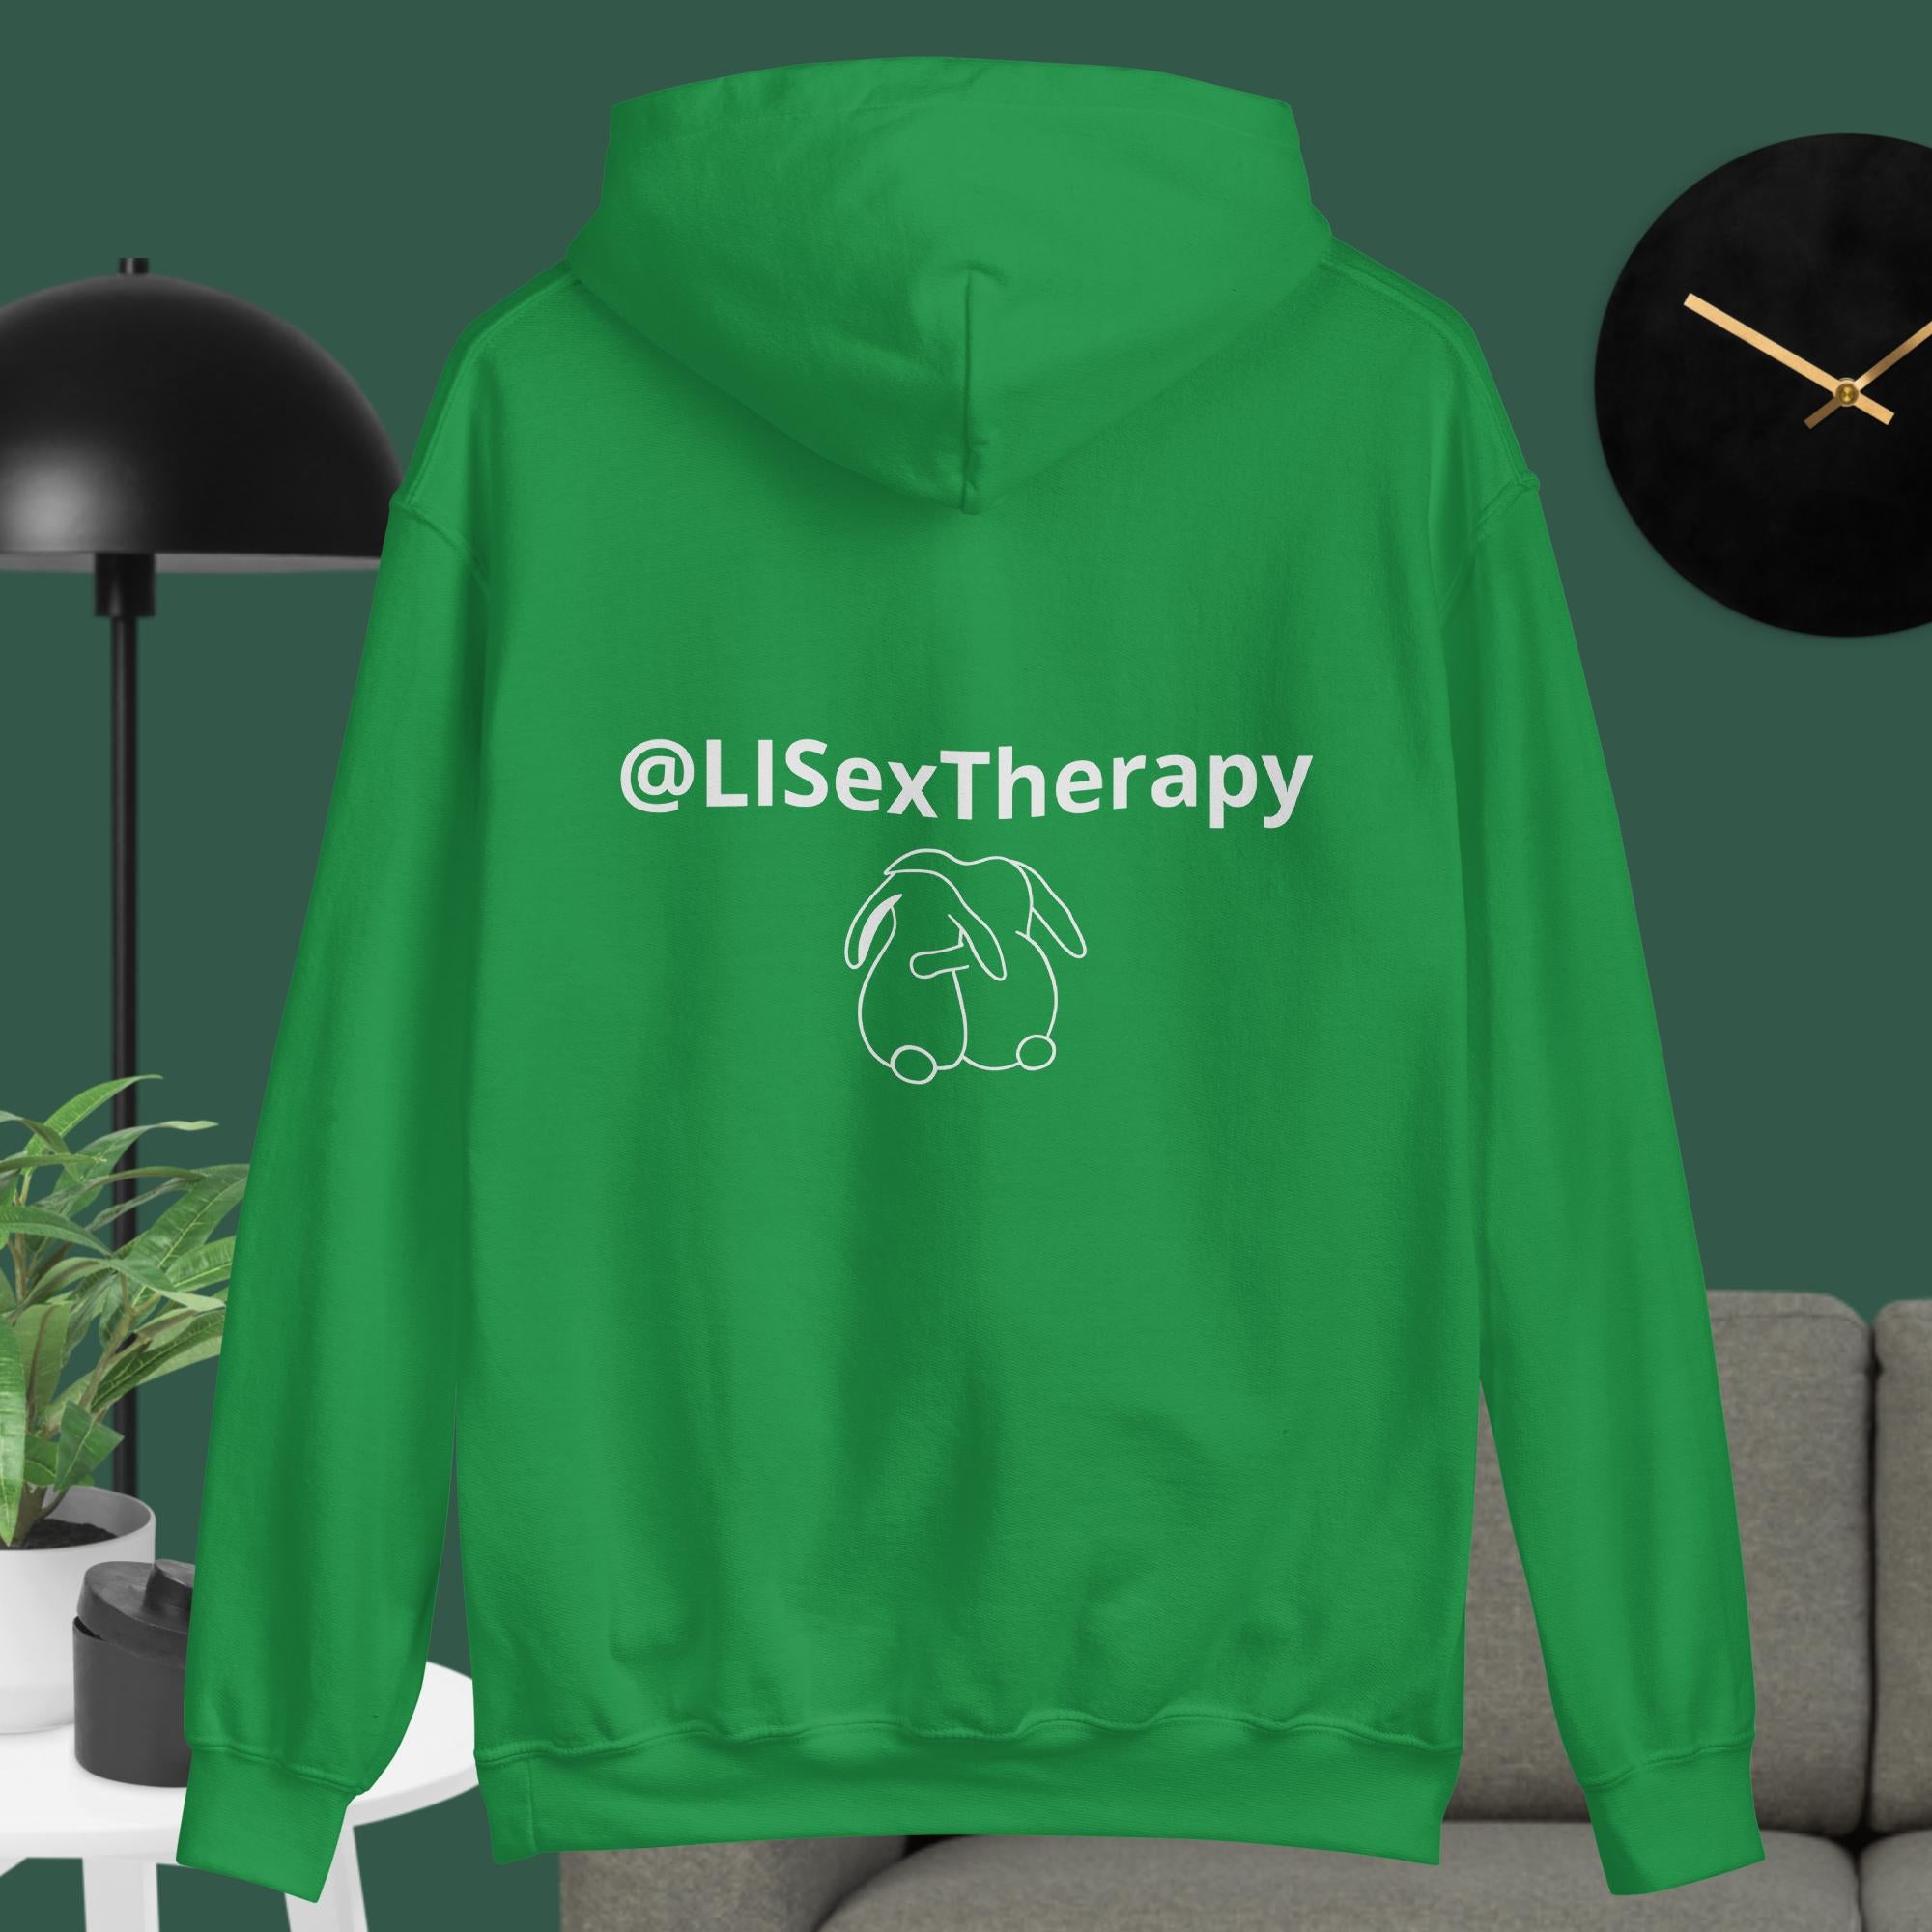 Hot People Go To Therapy Hoodie